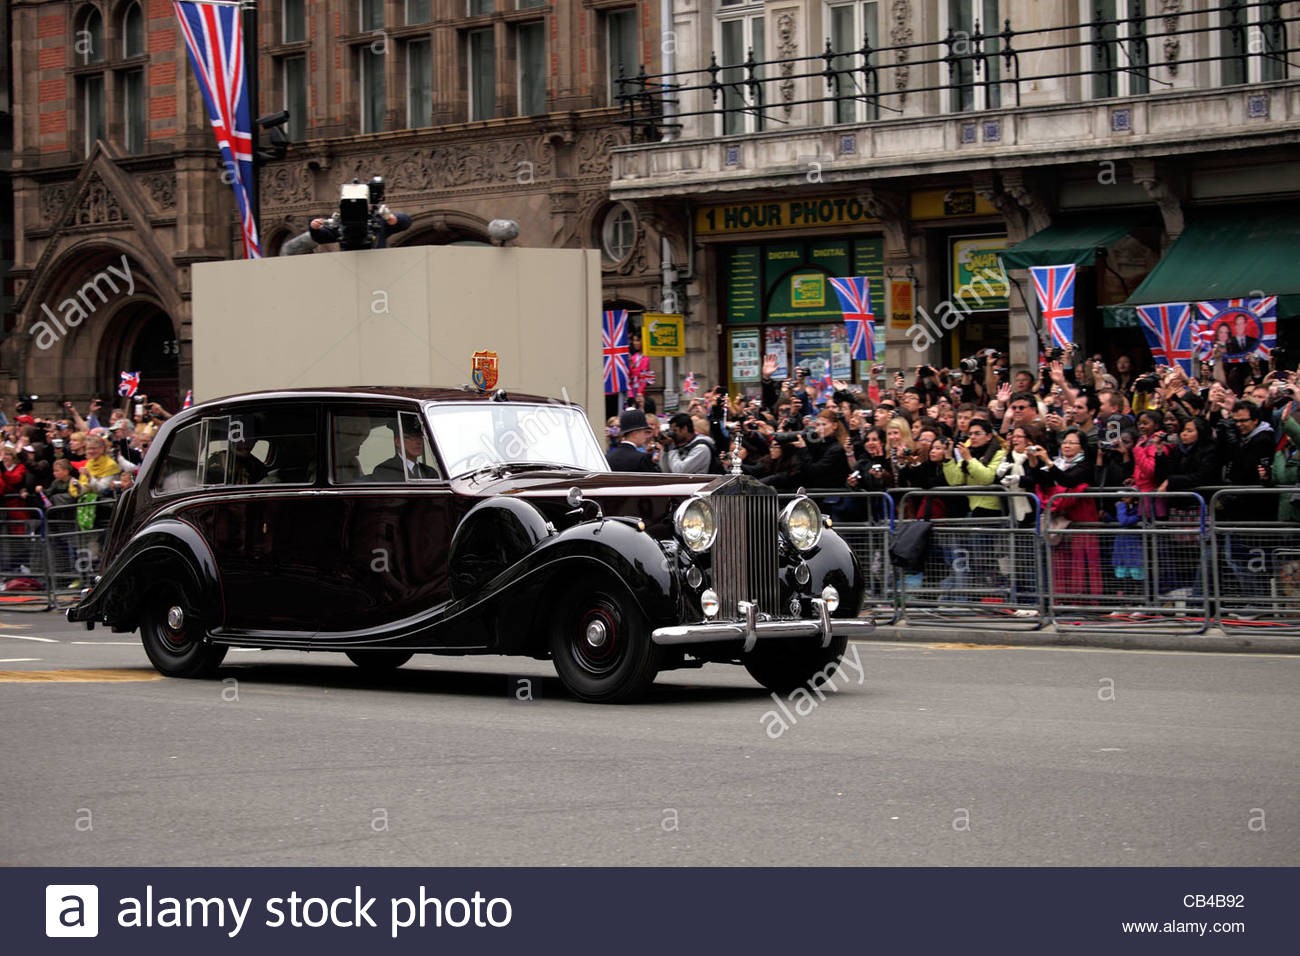 Prince Charles and the Duchess of Cornwall being driven in Rolls Royce.